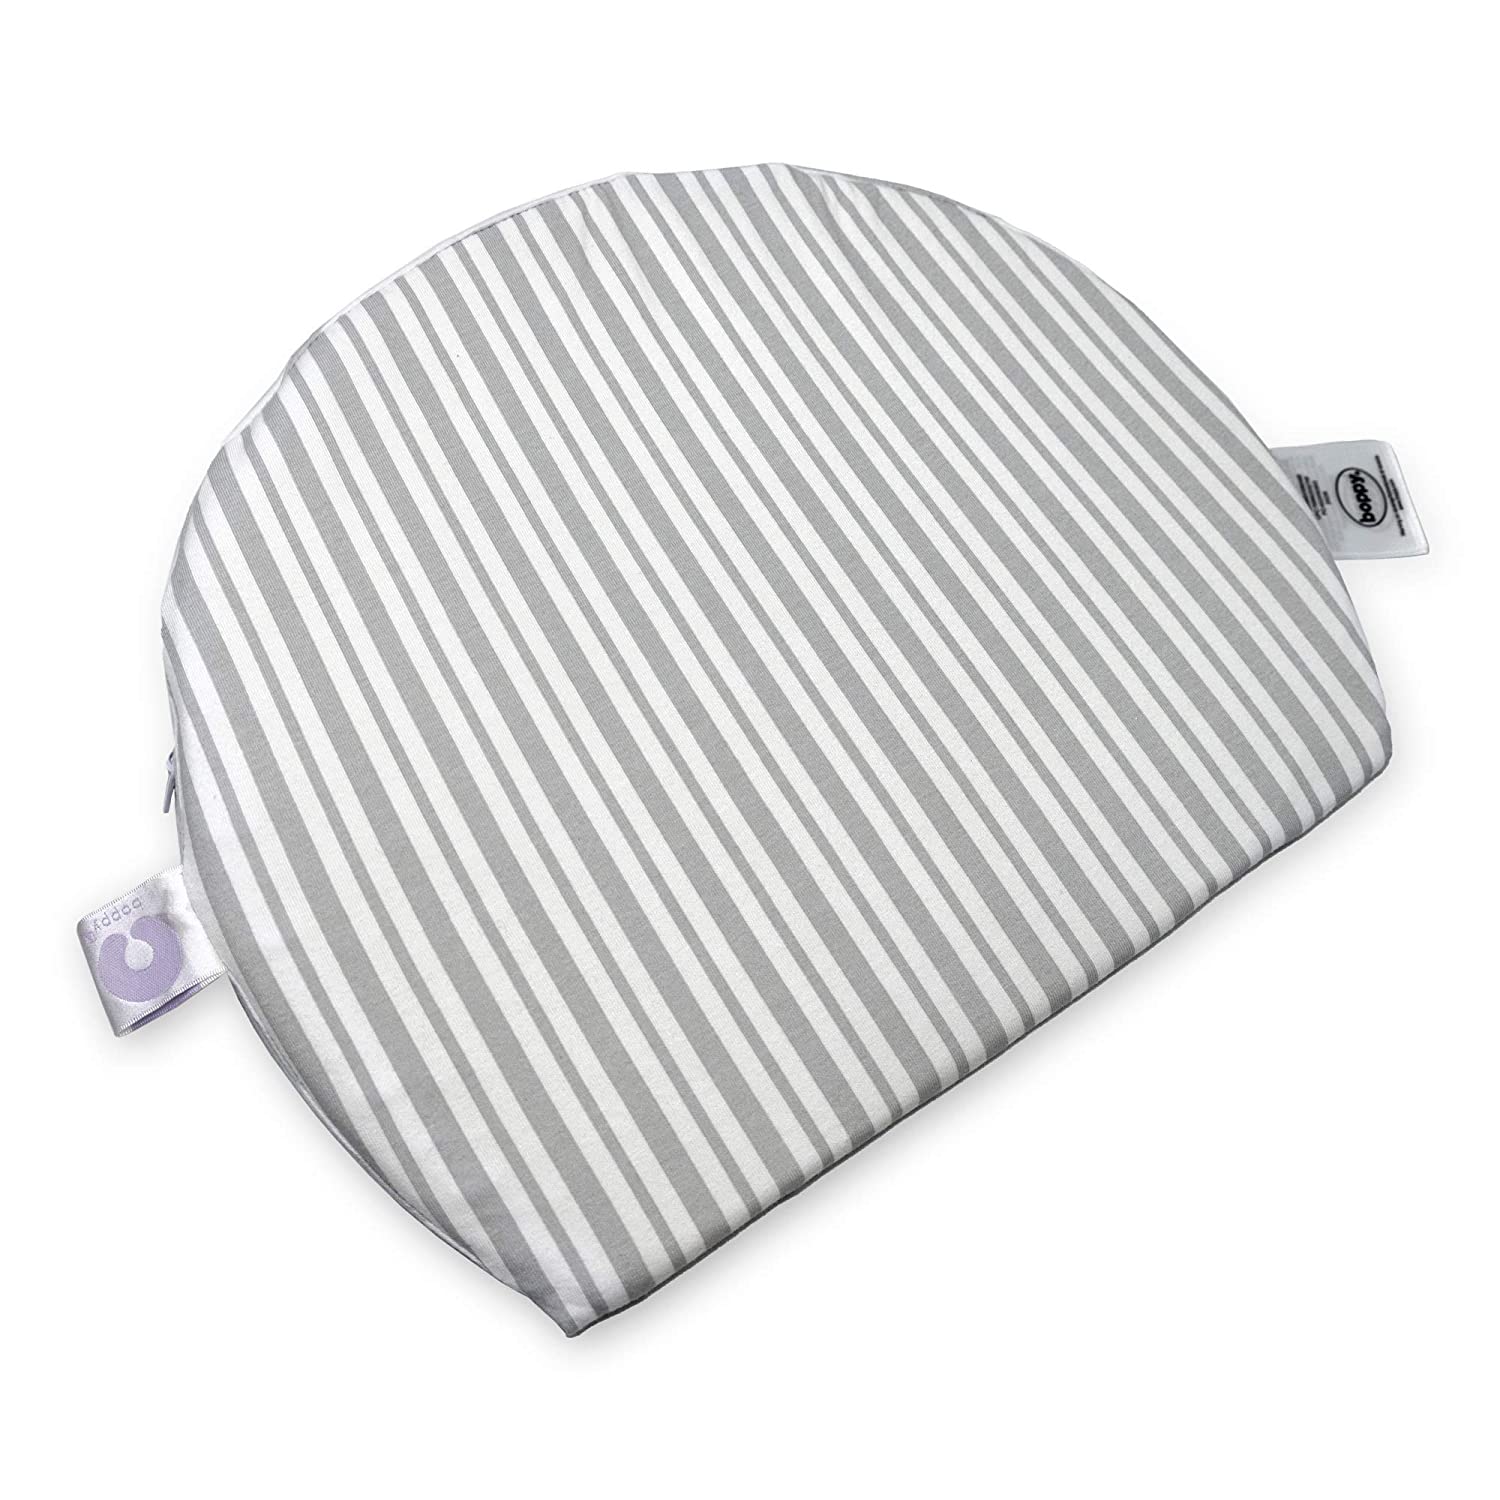 Boppy Pregnancy Wedge Support Pillow